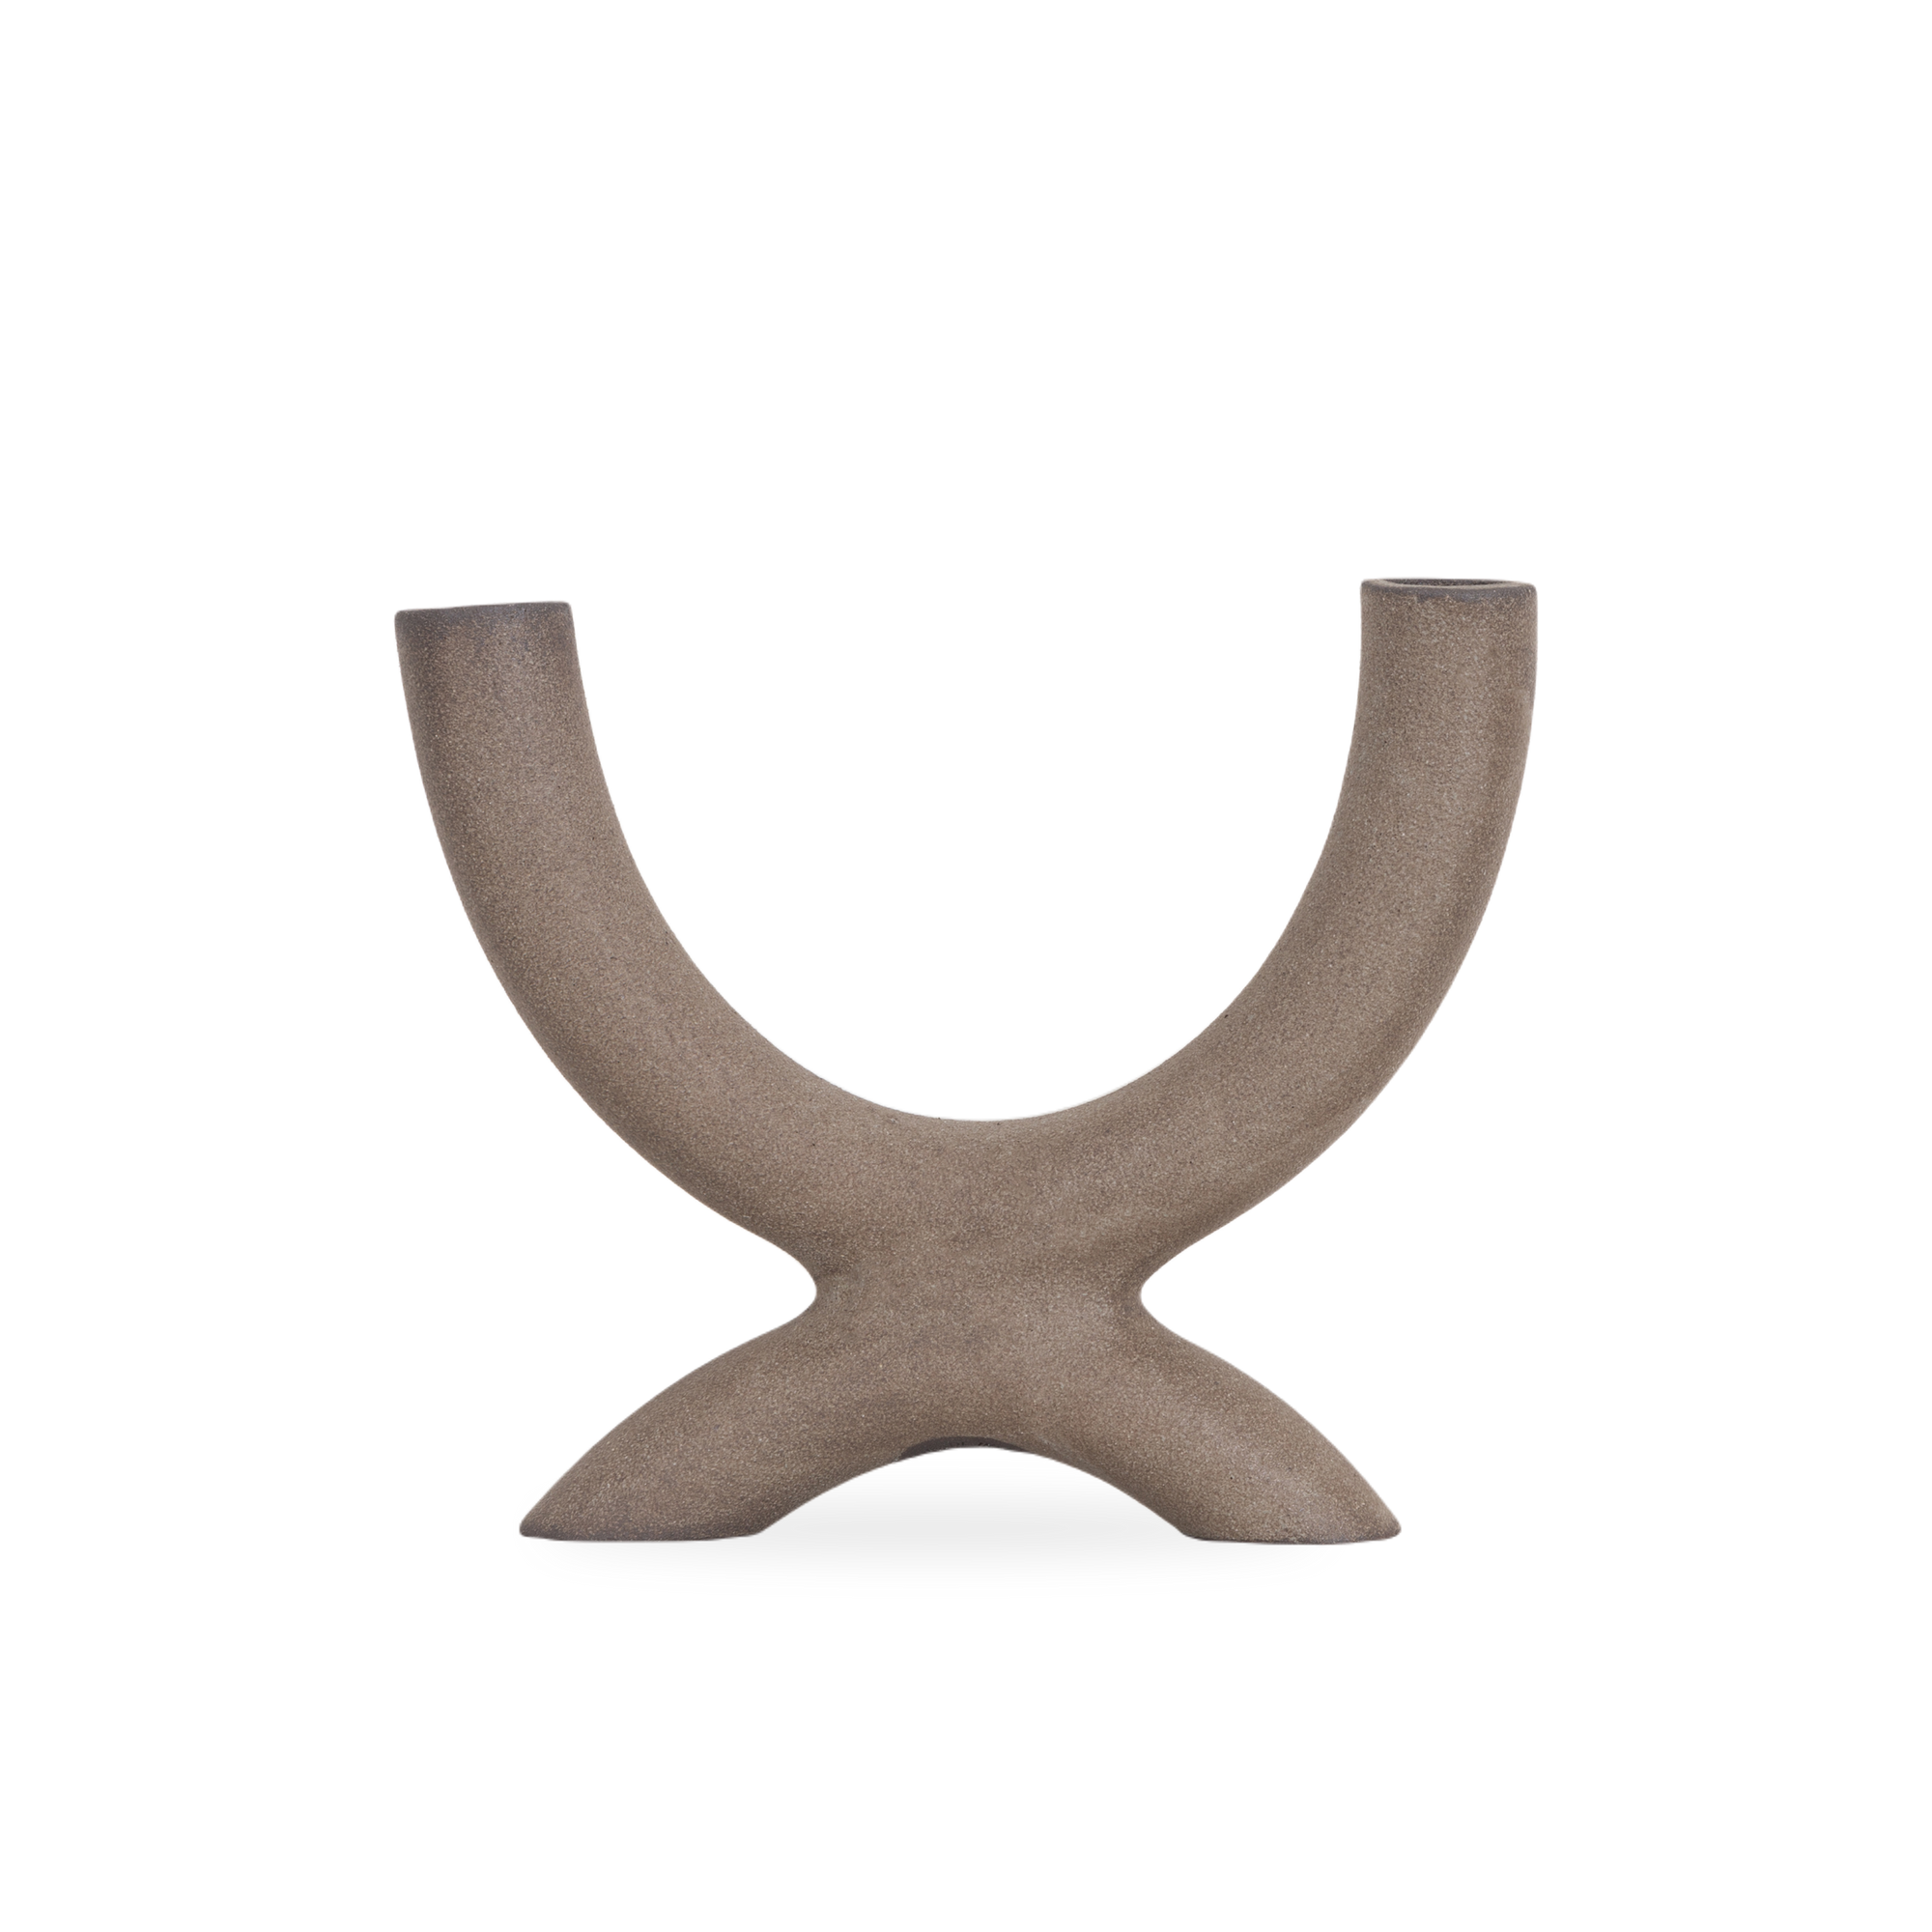 With the intent to provide a sense of relaxation and hospitality, the Forevermore Dual Candleholder features a minimalistic curved shape that can hold two candles in perfect unison